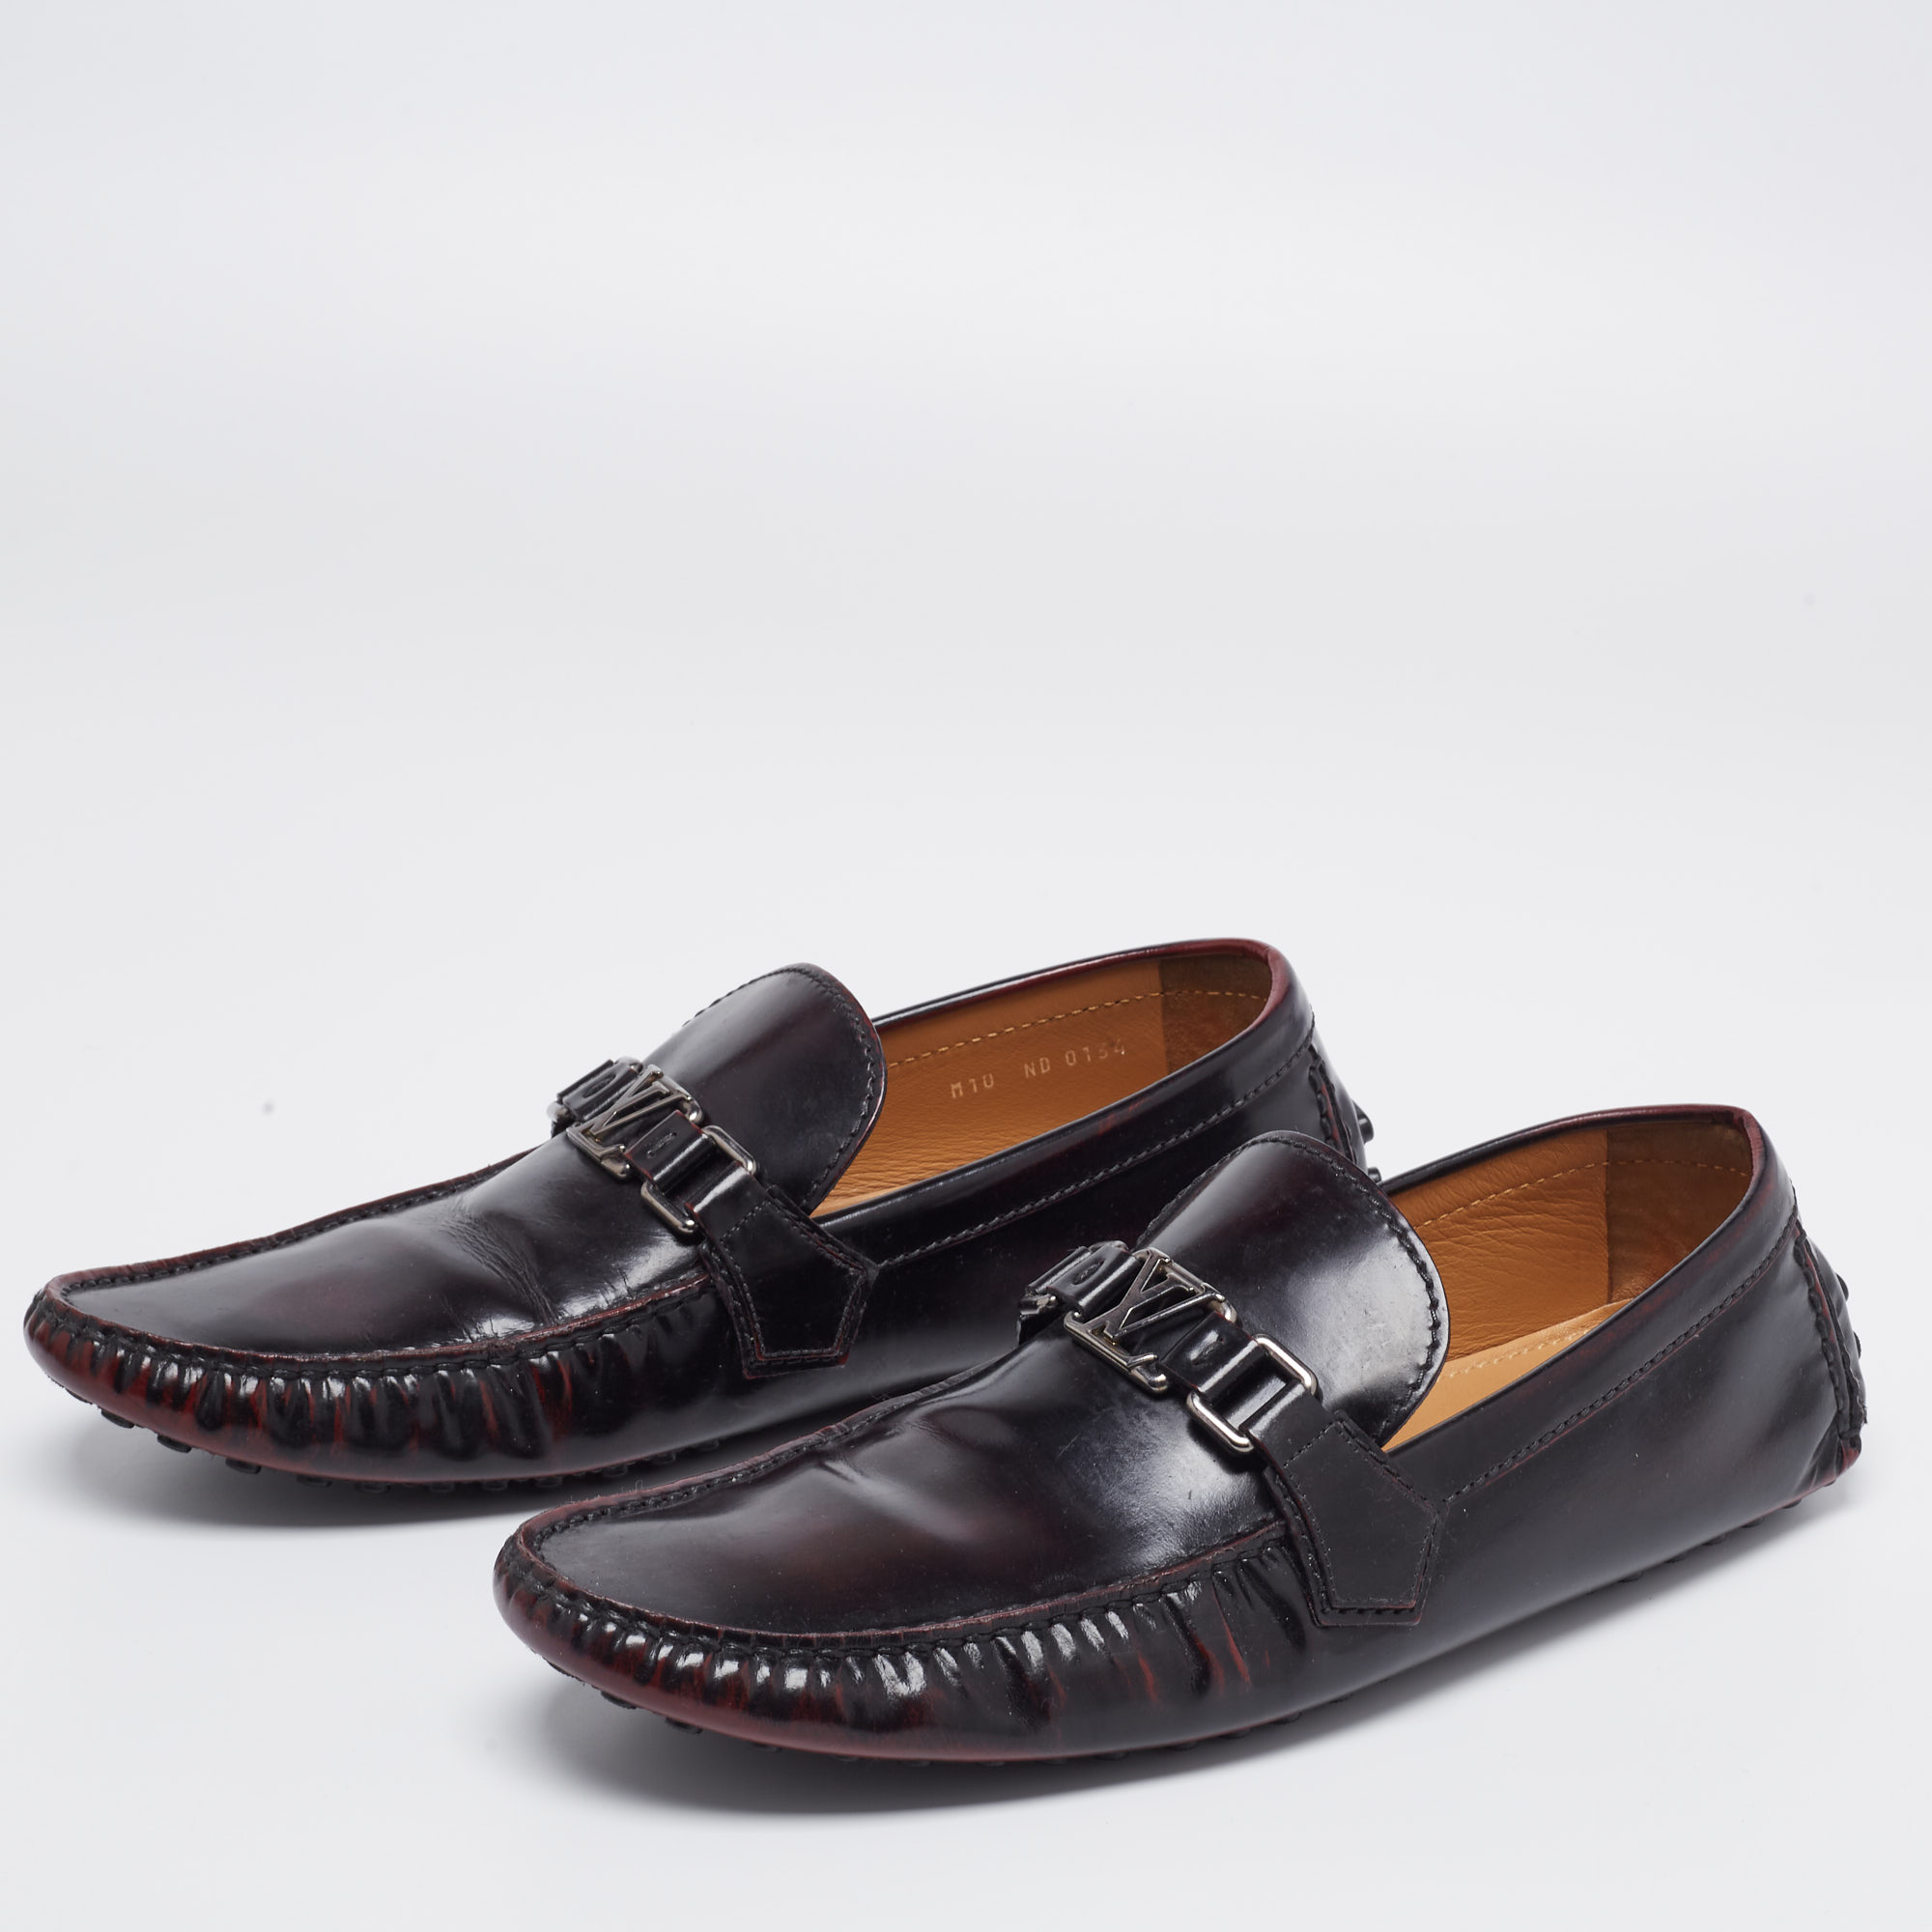 

Louis Vuitton Two Tone Leather Hockenheim Slip On Loafers Size, Burgundy